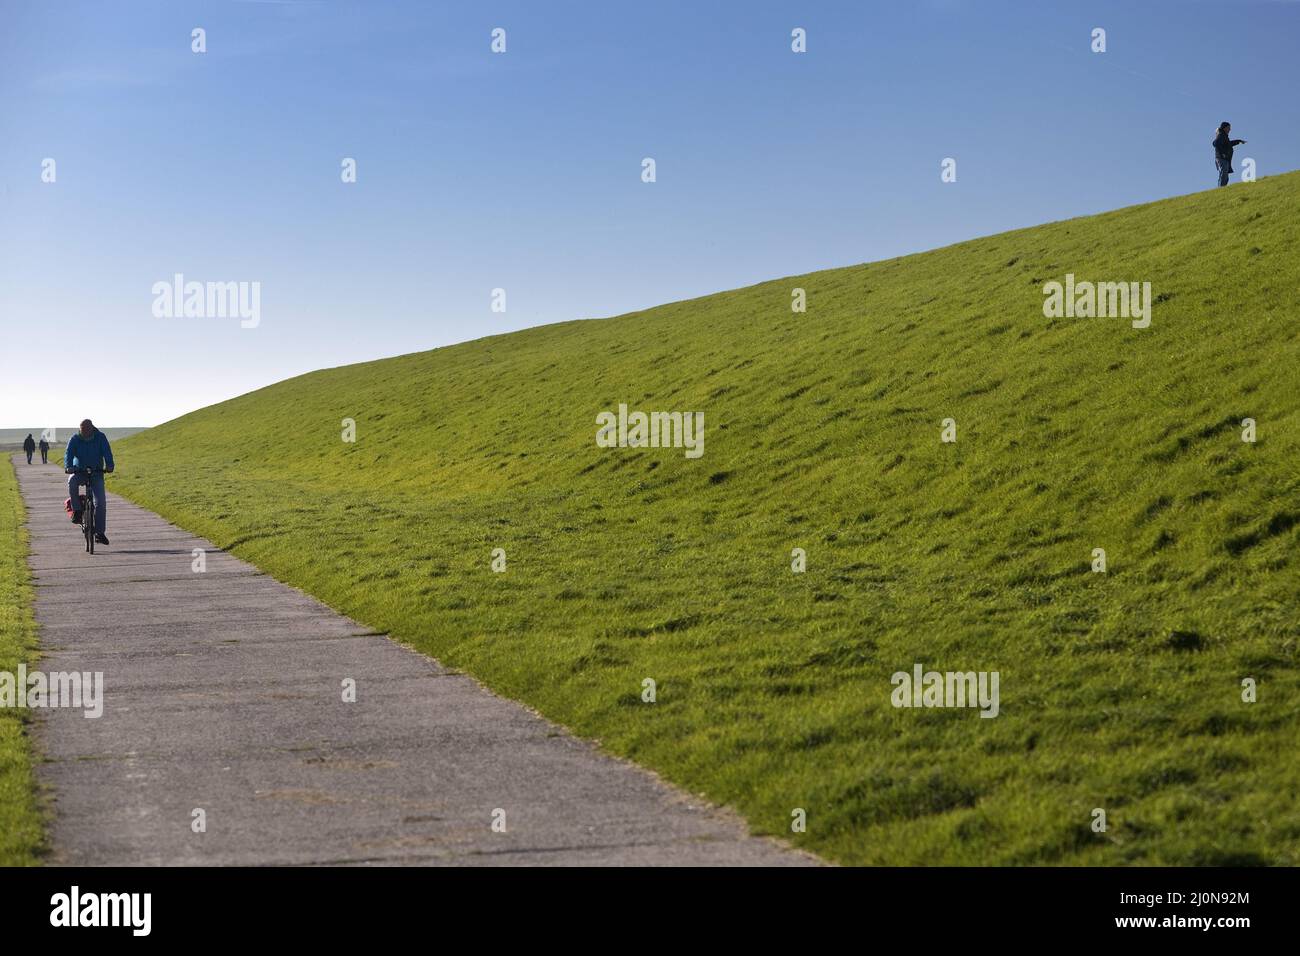 Dike landscape with a lot of space and few people, Pilsum, East Frisia, Germany, Europe Stock Photo